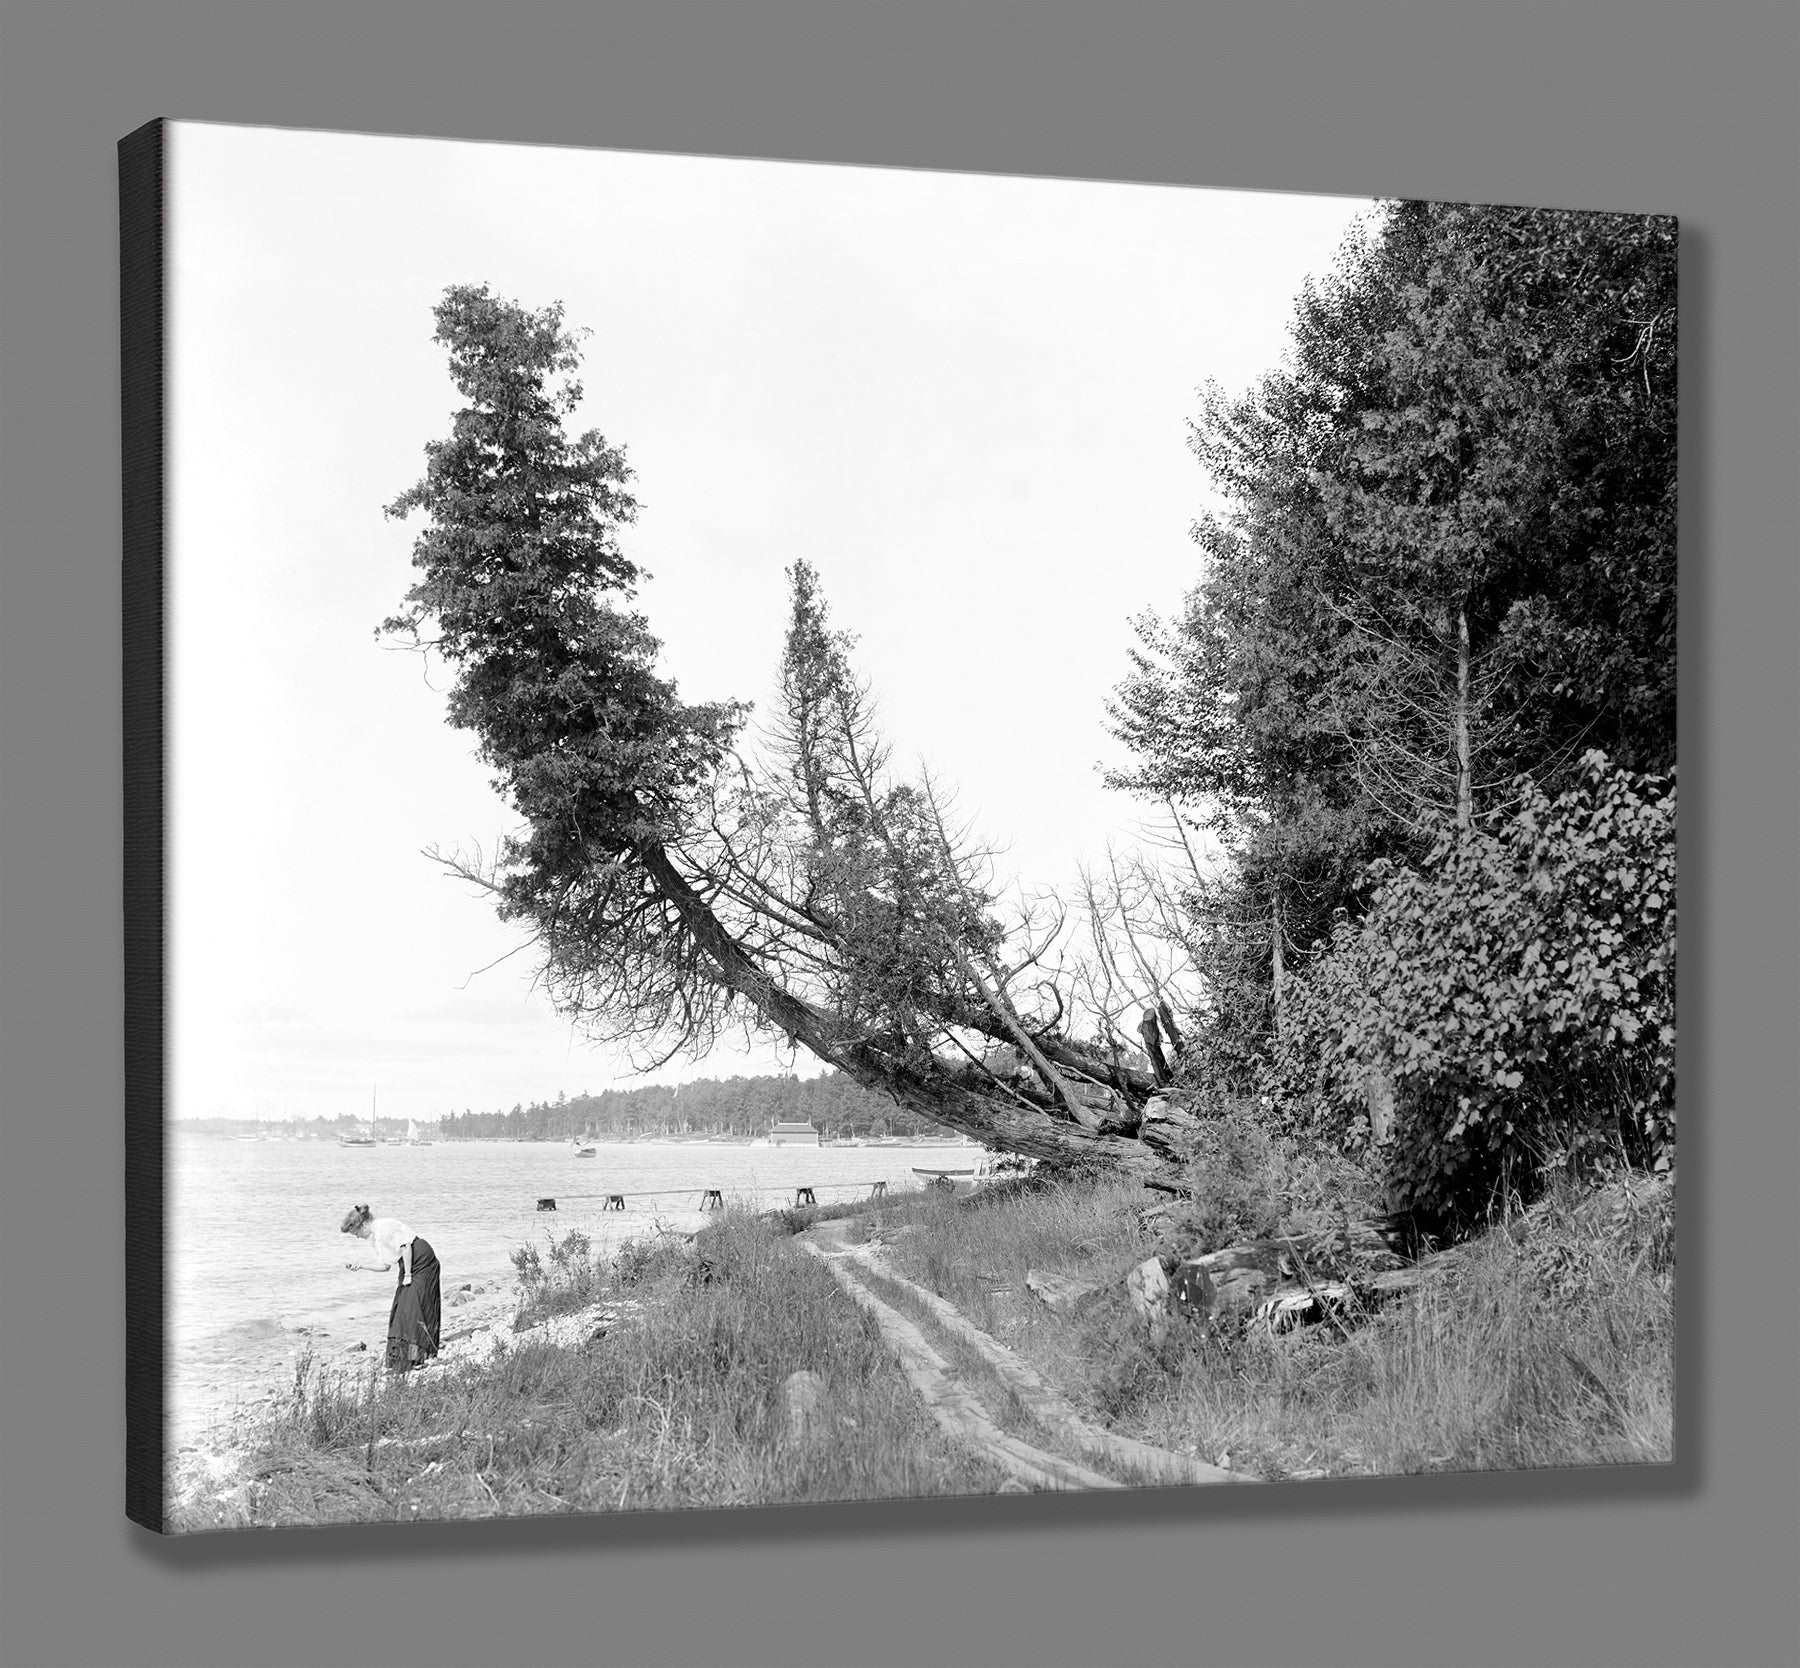 A canvas print of a vintage photo of the shoreline of Michigan's Roaring Brook